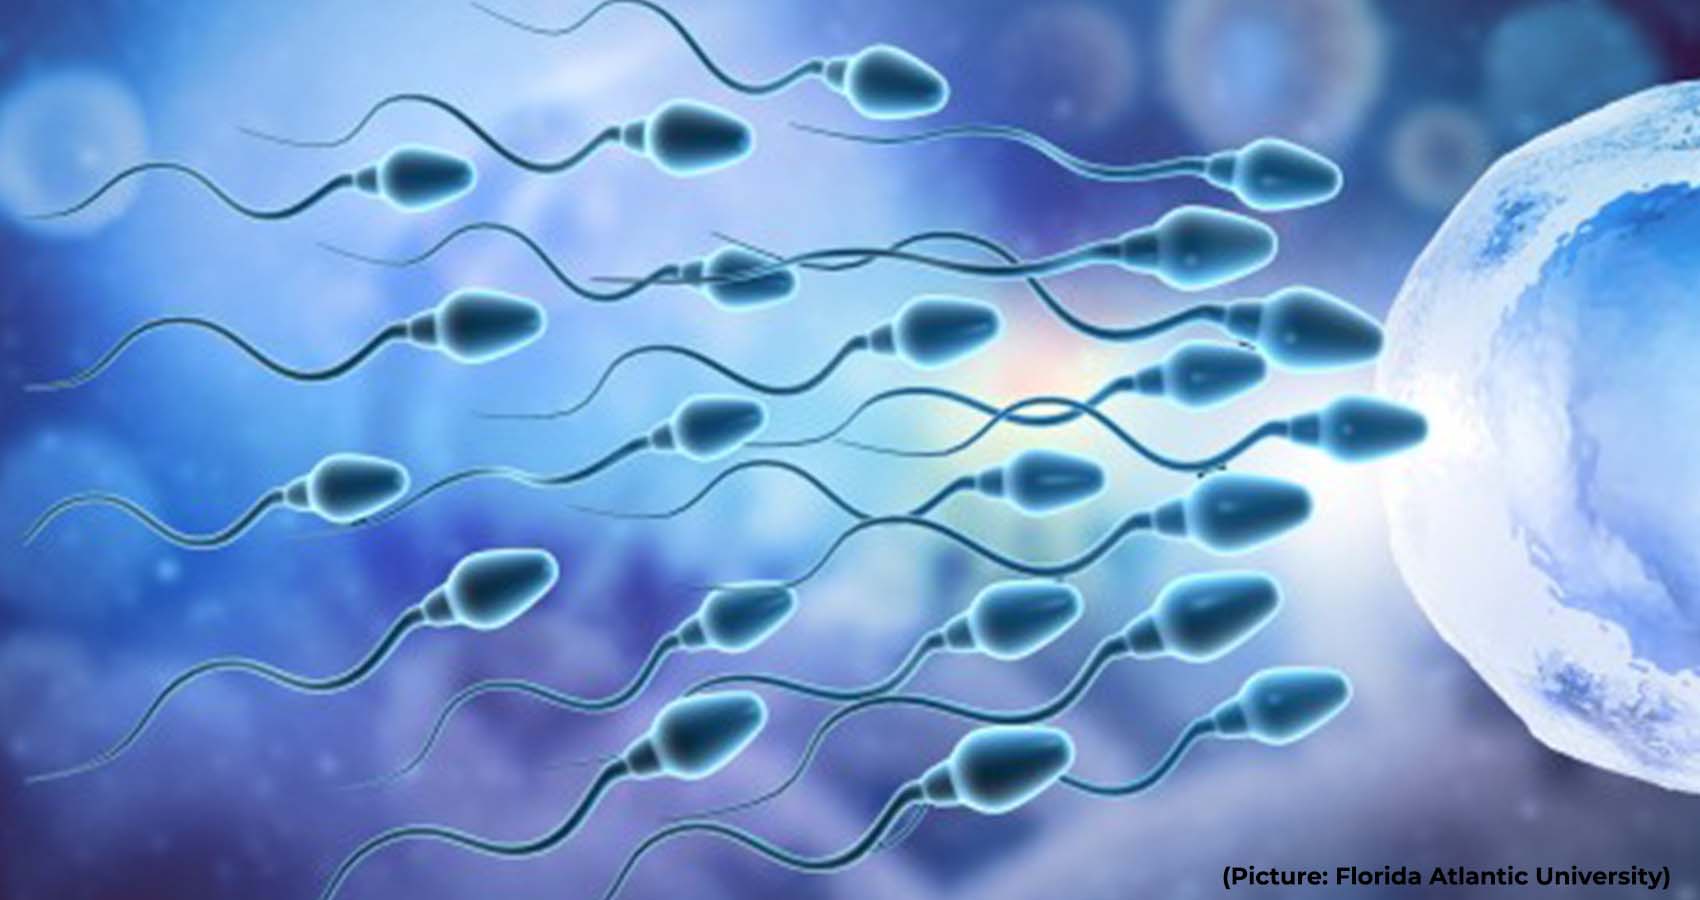 New Device Helps Sperm to ‘Go Against the Flow’ Benefitting Those With Infertility